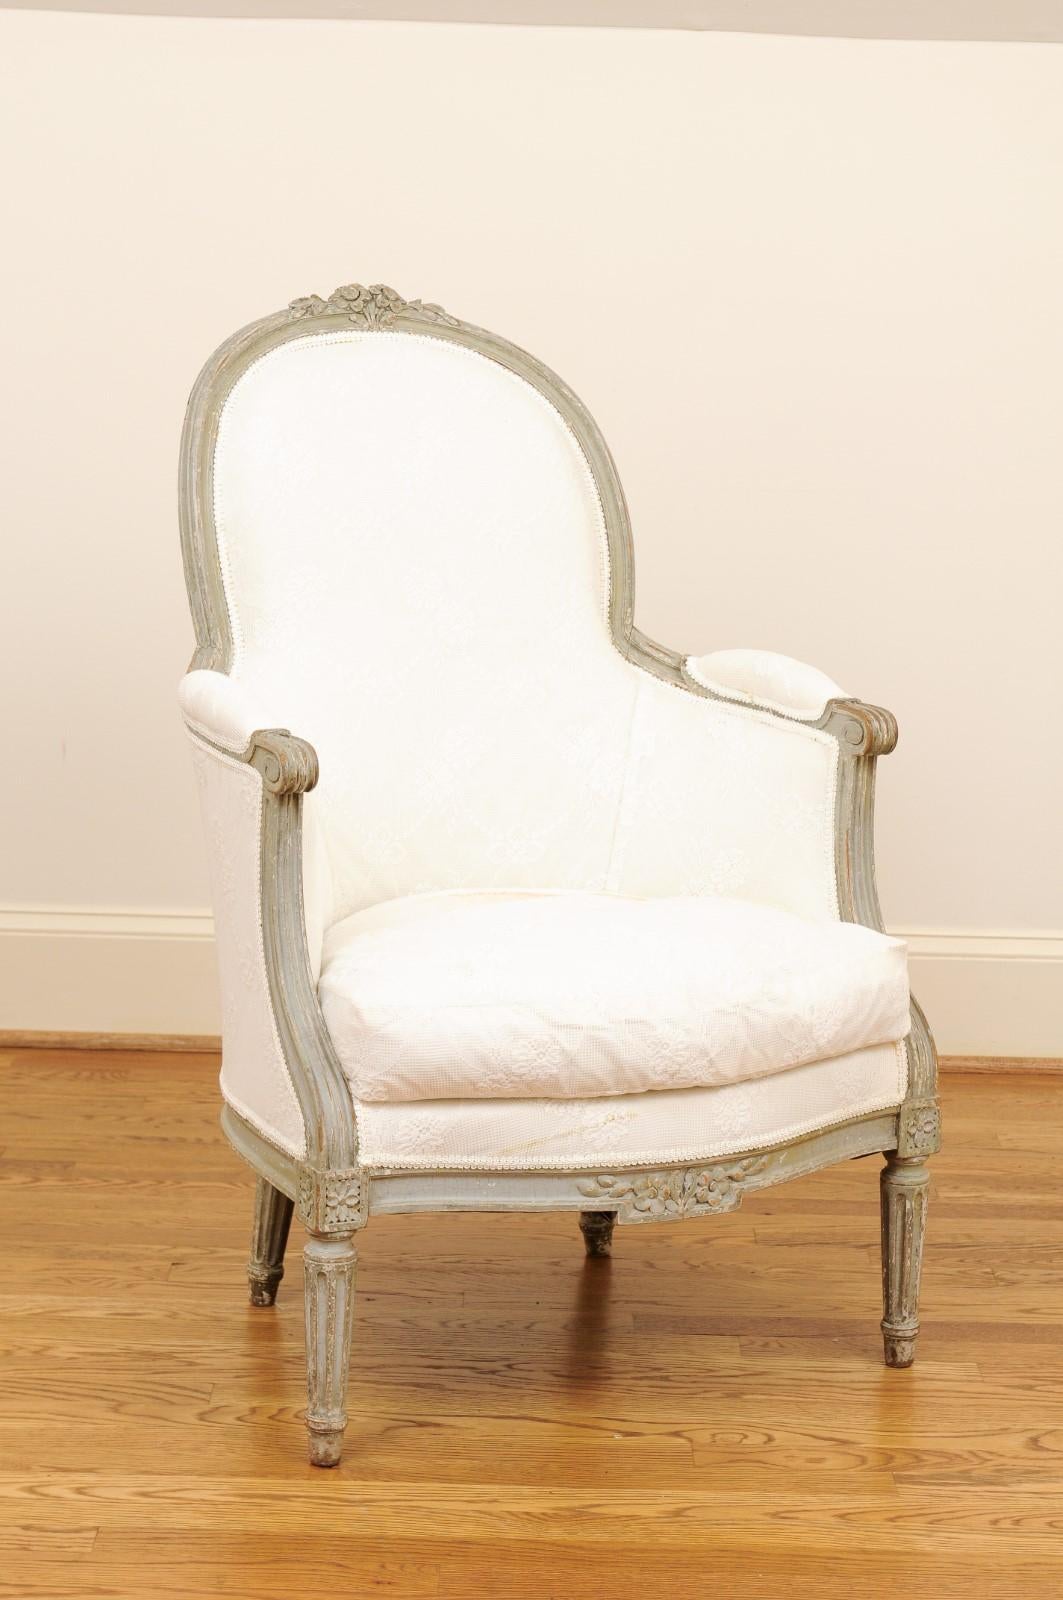 A French Louis XVI style painted wood bergère chair from the mid-19th century, with carved floral decor and new upholstery. Created in France during the second quarter of the 19th century, this bergère chair features a slightly slanted back, adorned